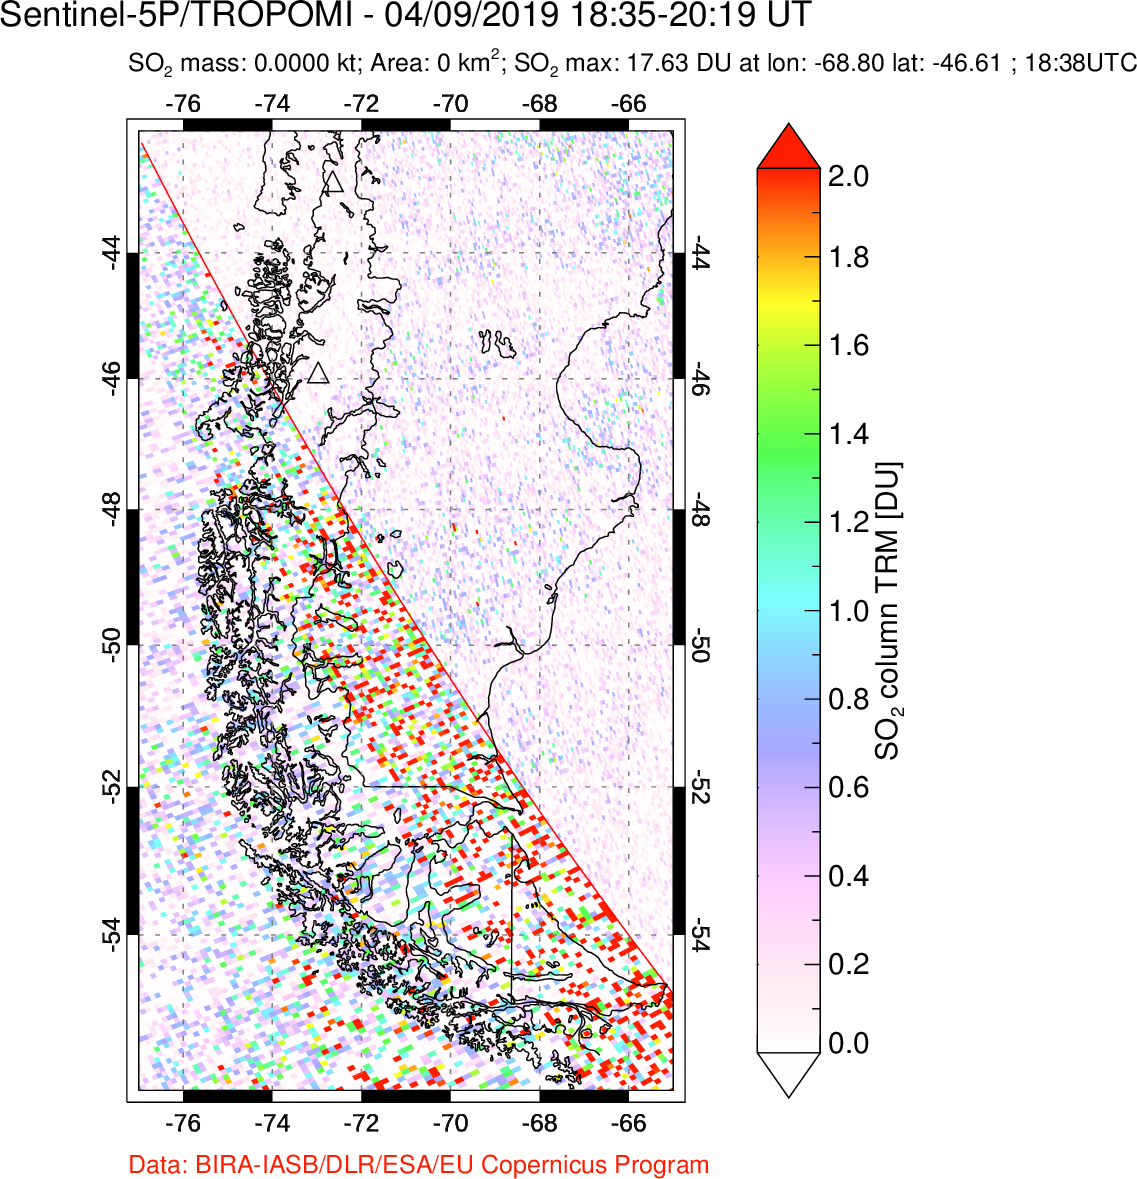 A sulfur dioxide image over Southern Chile on Apr 09, 2019.